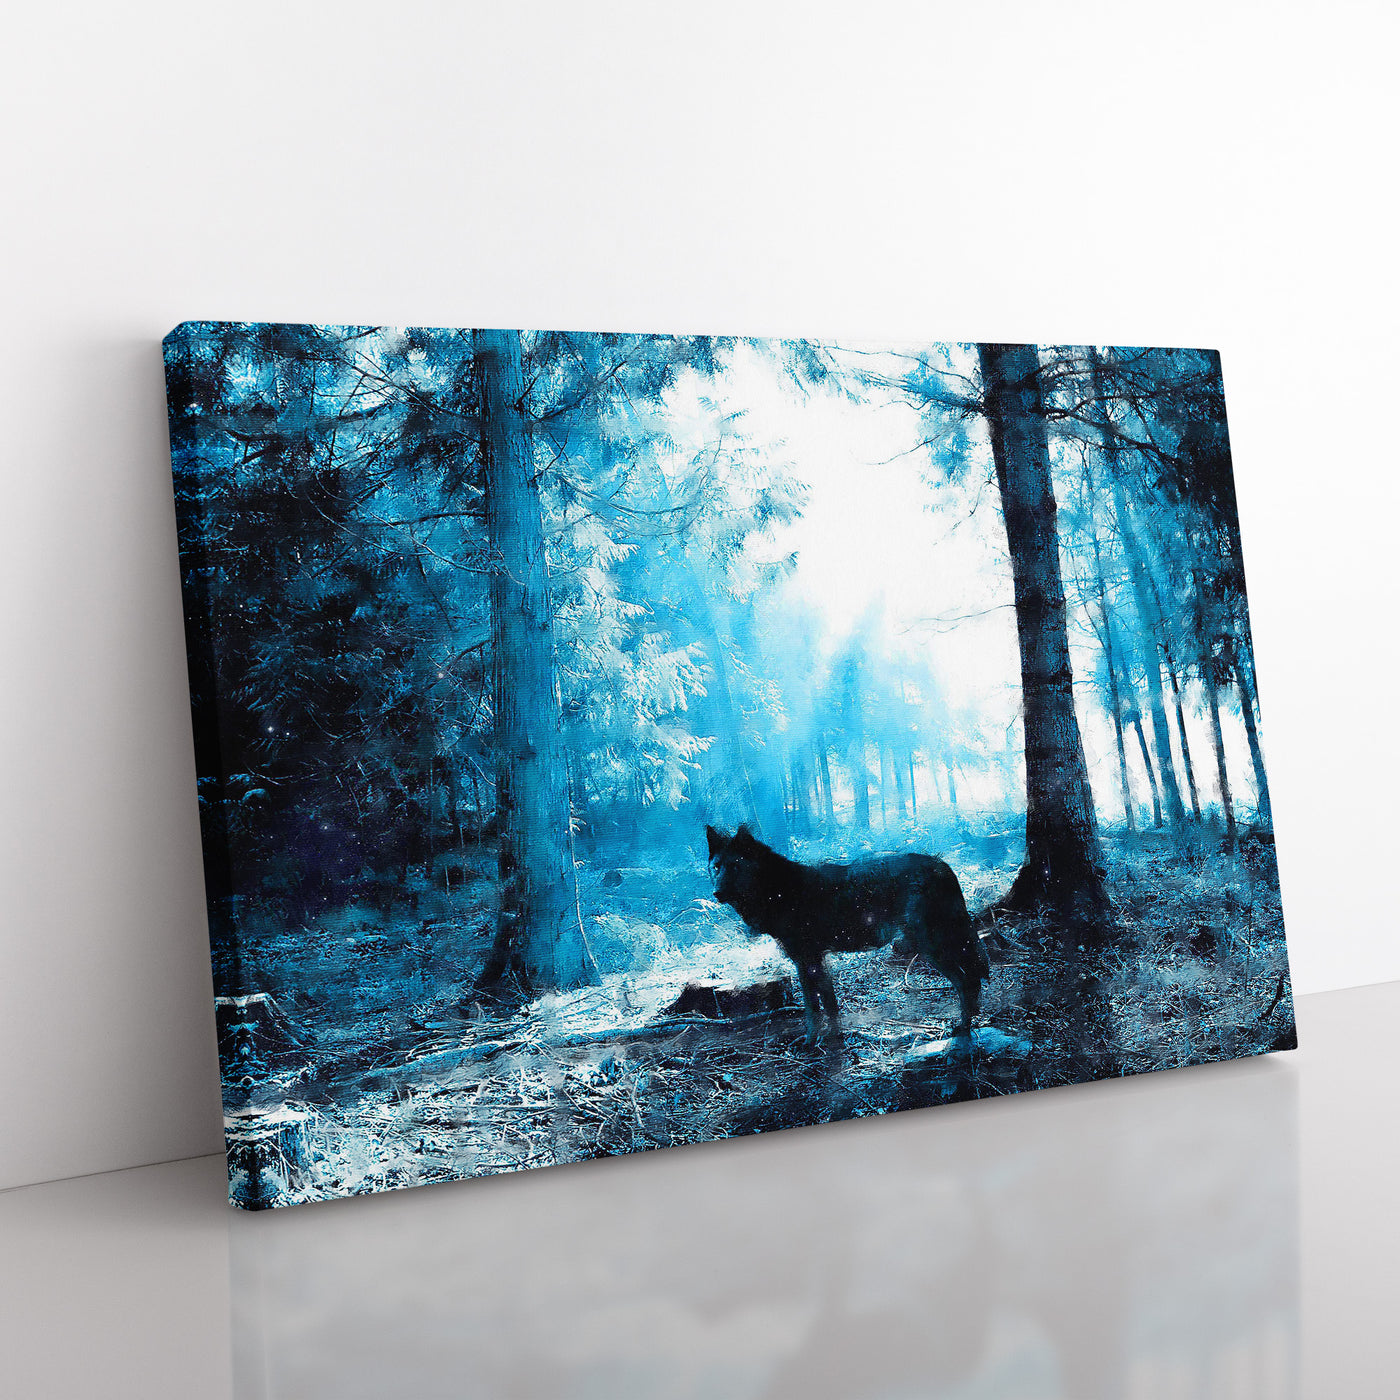 Wolf In The Blue Forest